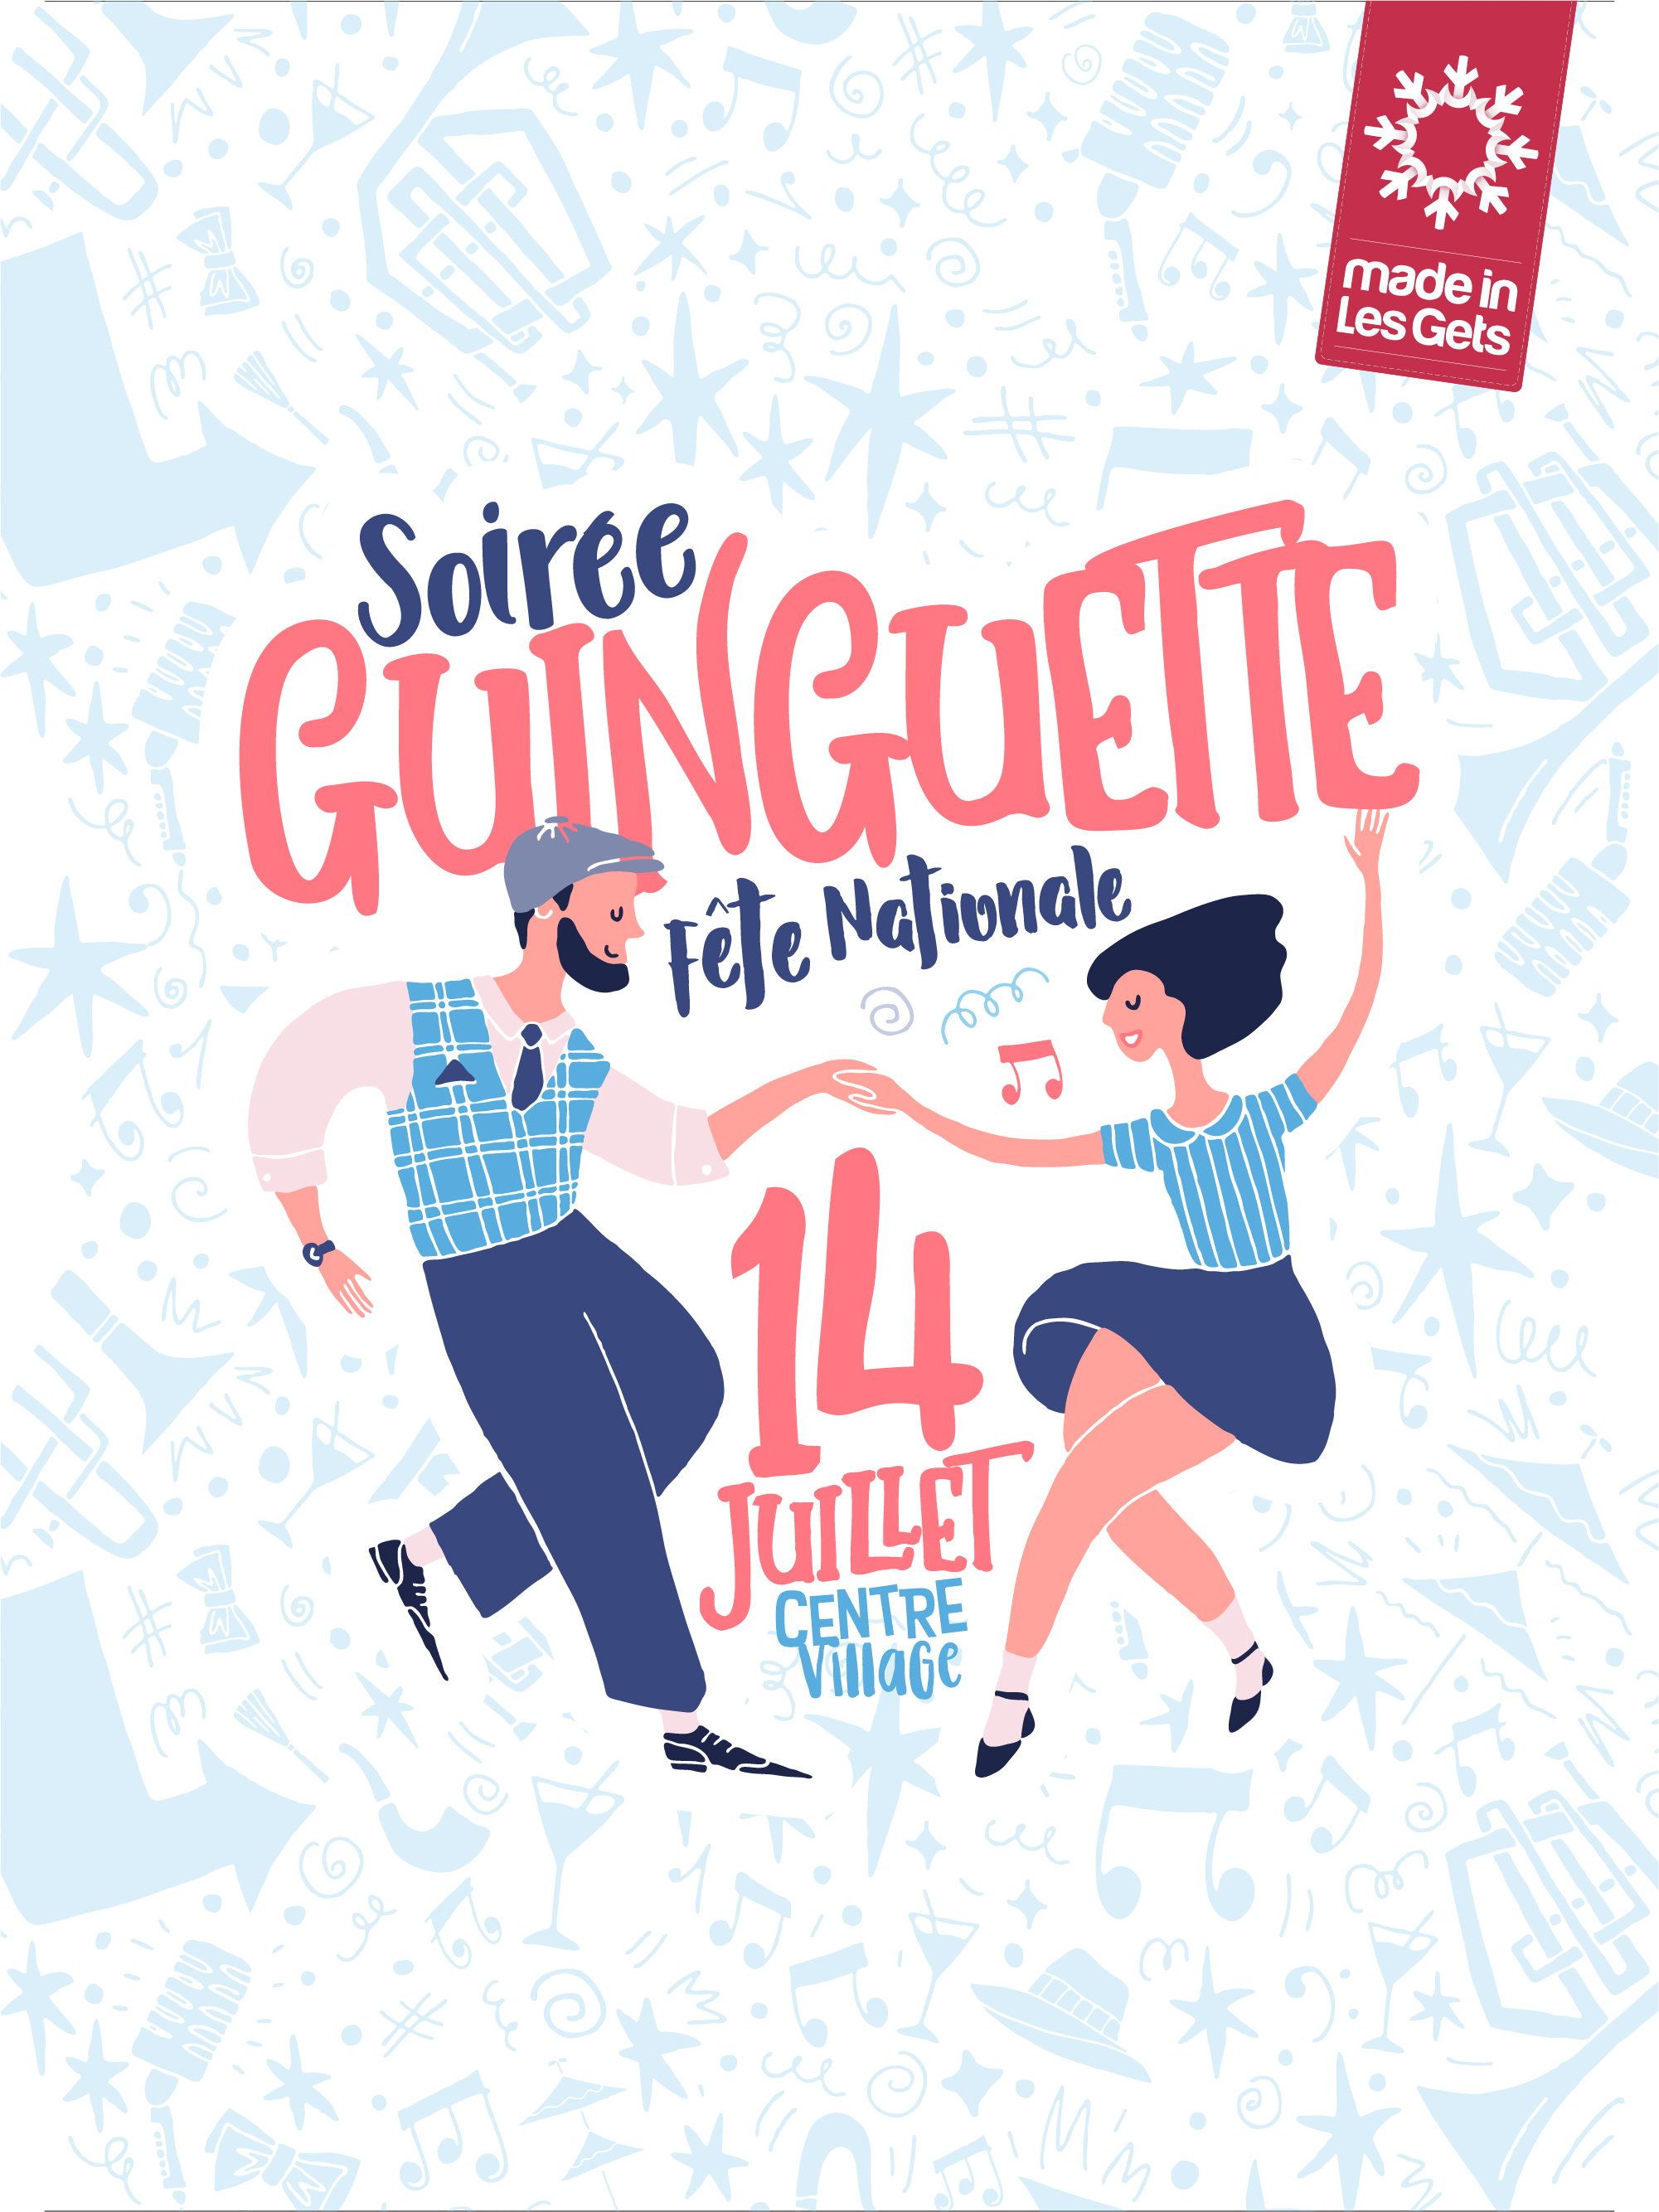 National Day 'Guinguette' party - Summer events - Les Gets